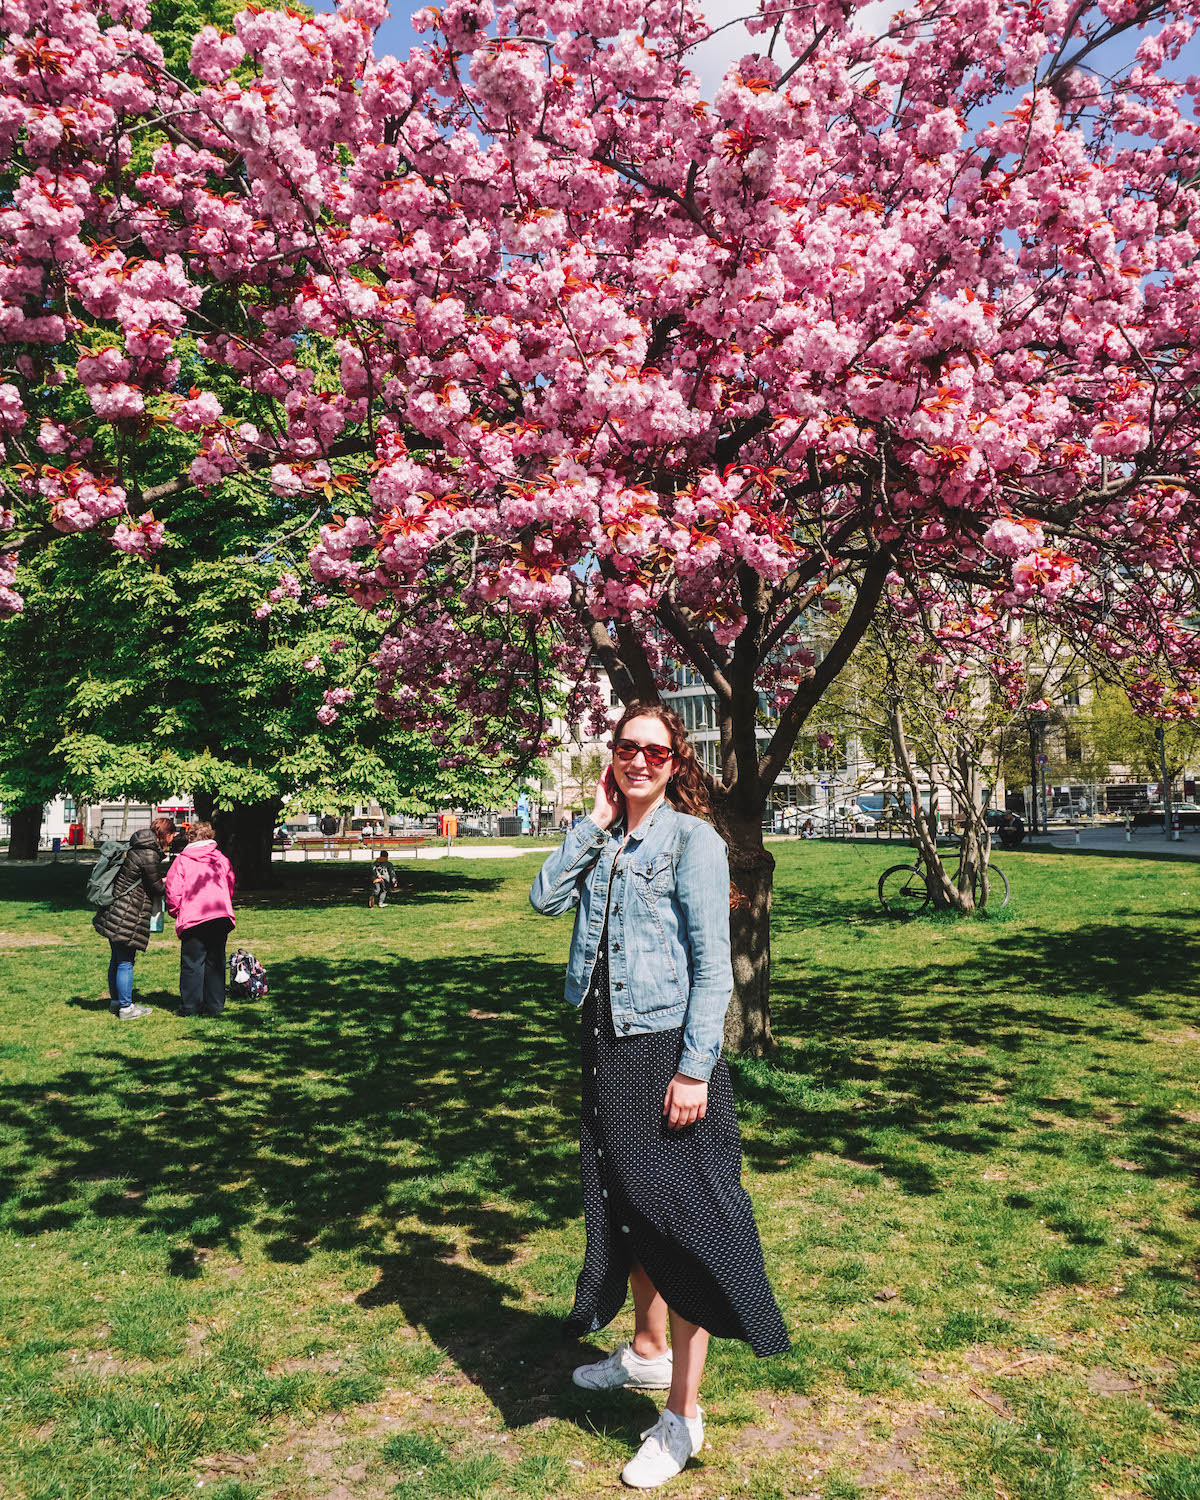 A woman smiling in front of a cherry blossom tree